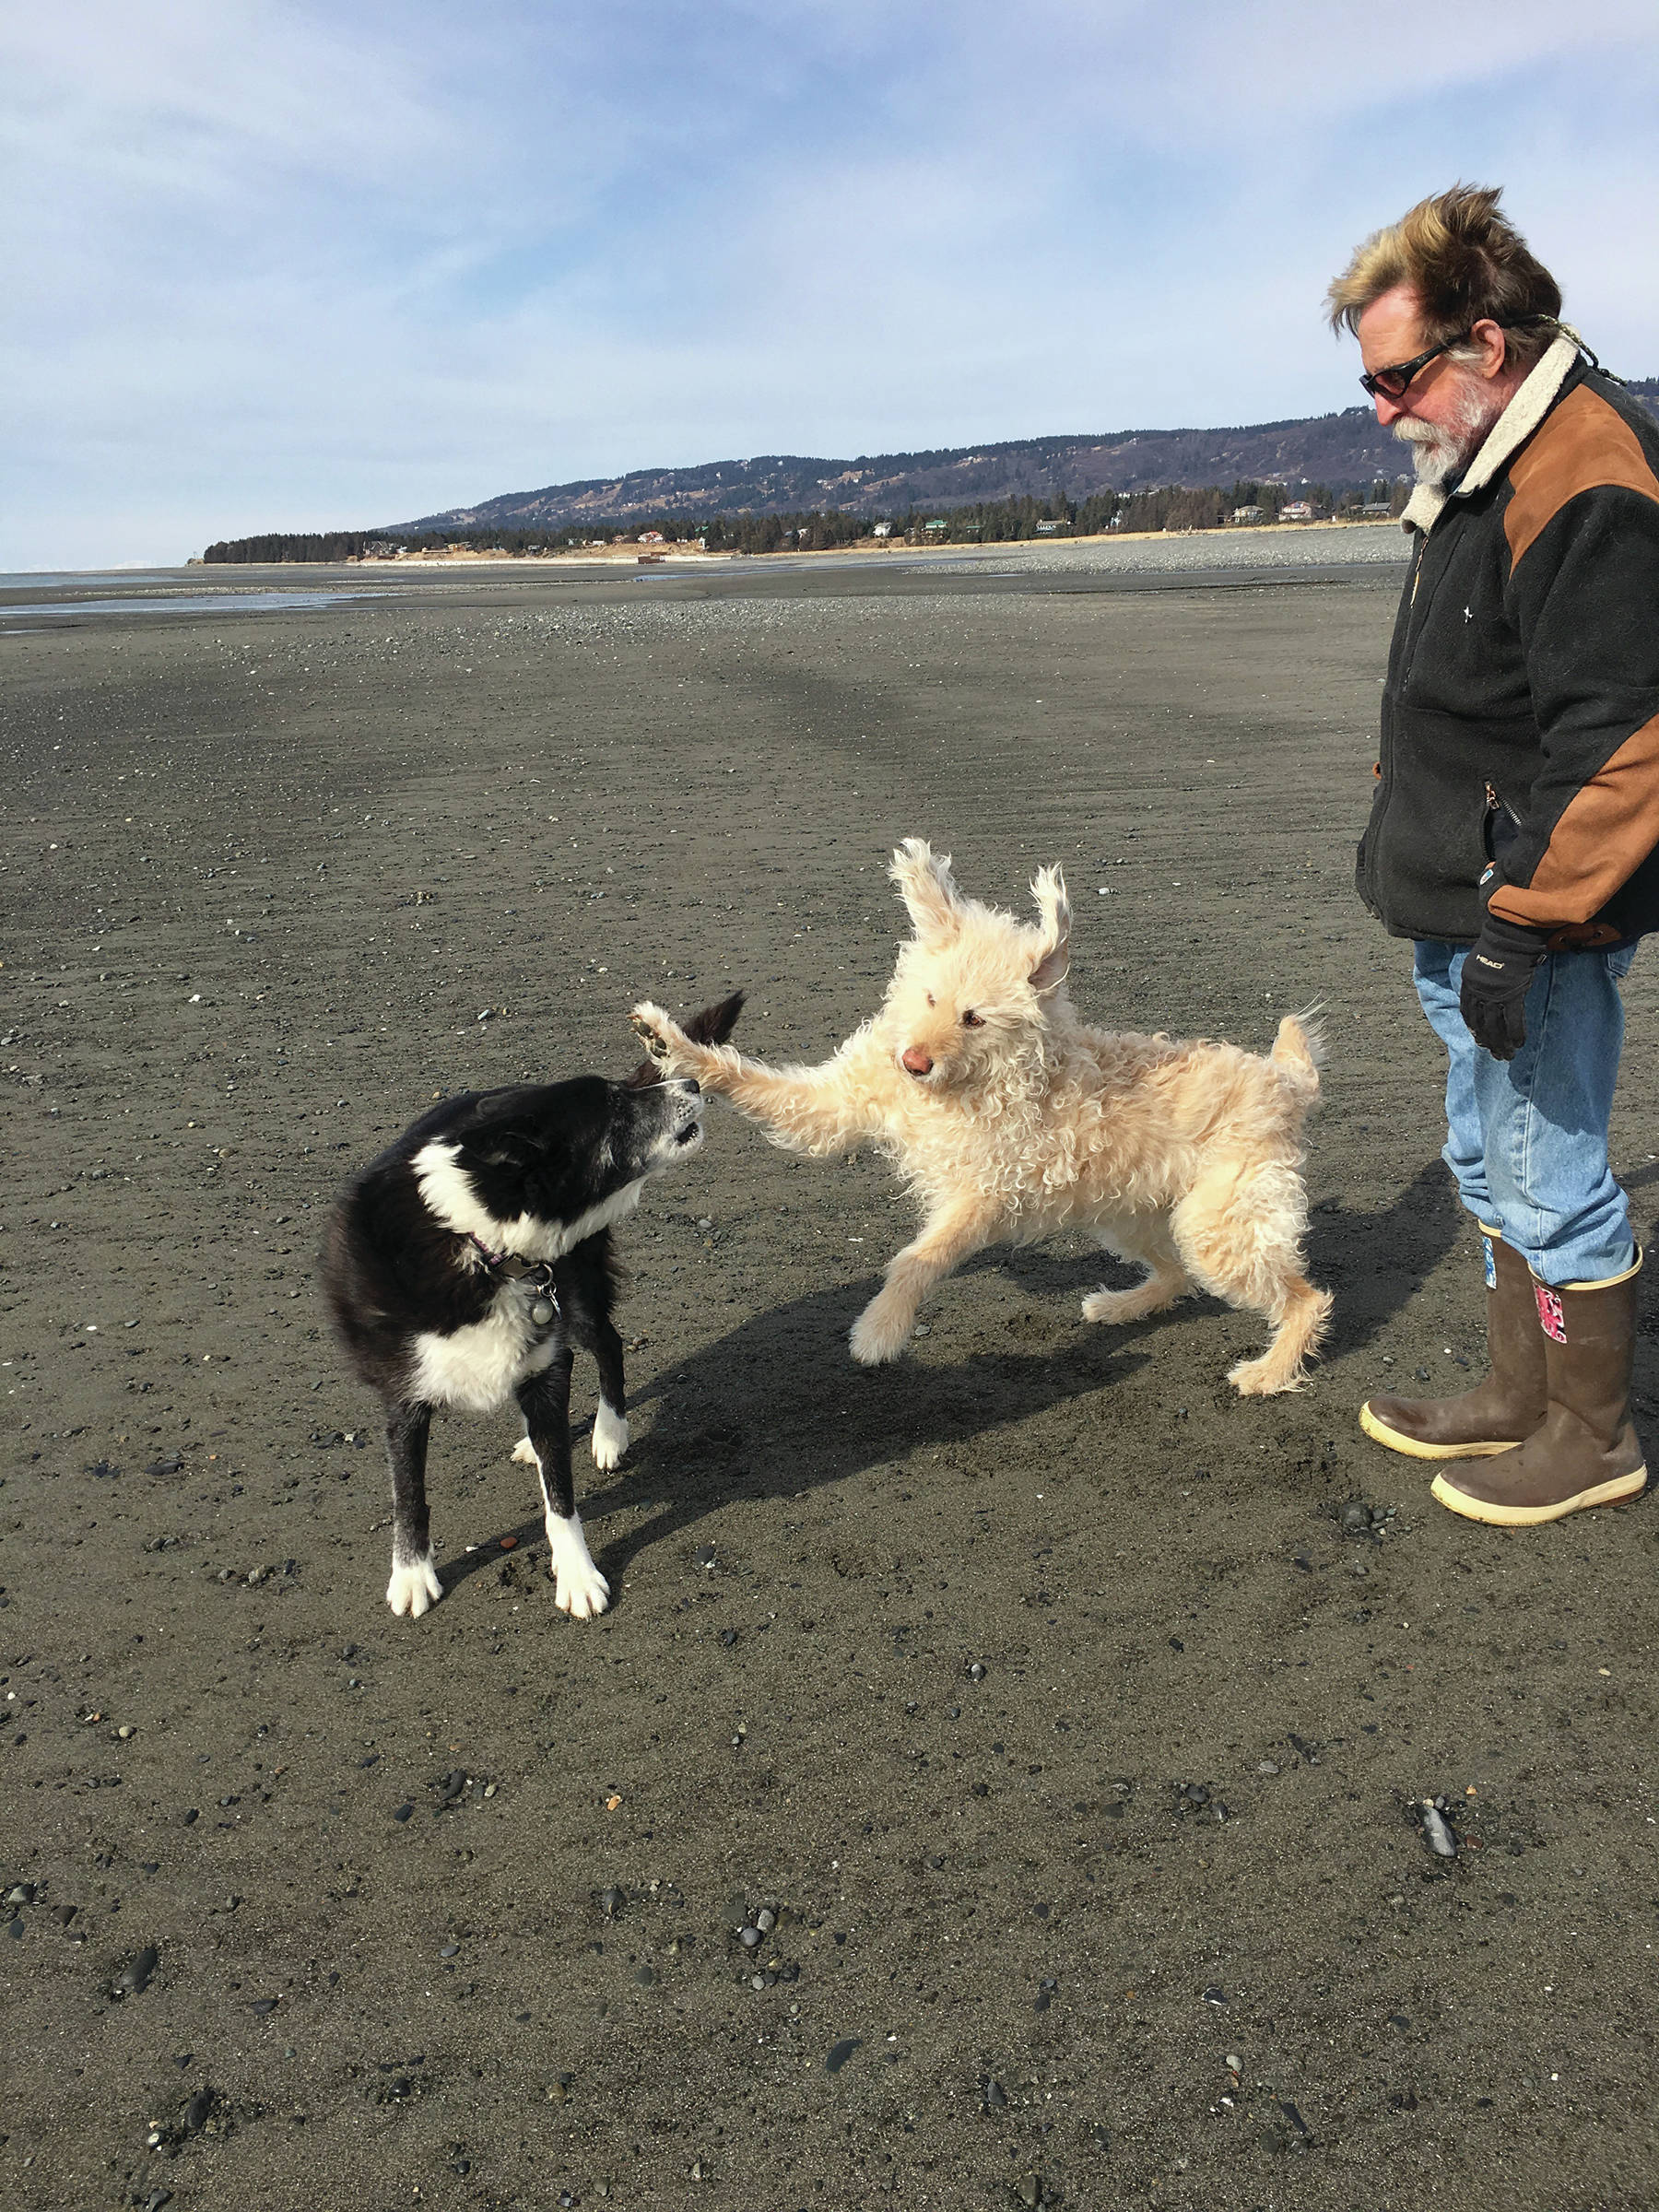 Michael Armstrong walks on the Homer Spit beach with his dog, Leia, center, and a dog friend, Tuuli, on April 3, 2018, in Homer, Alaska. (Photo by Megan Pacer/Homer News)